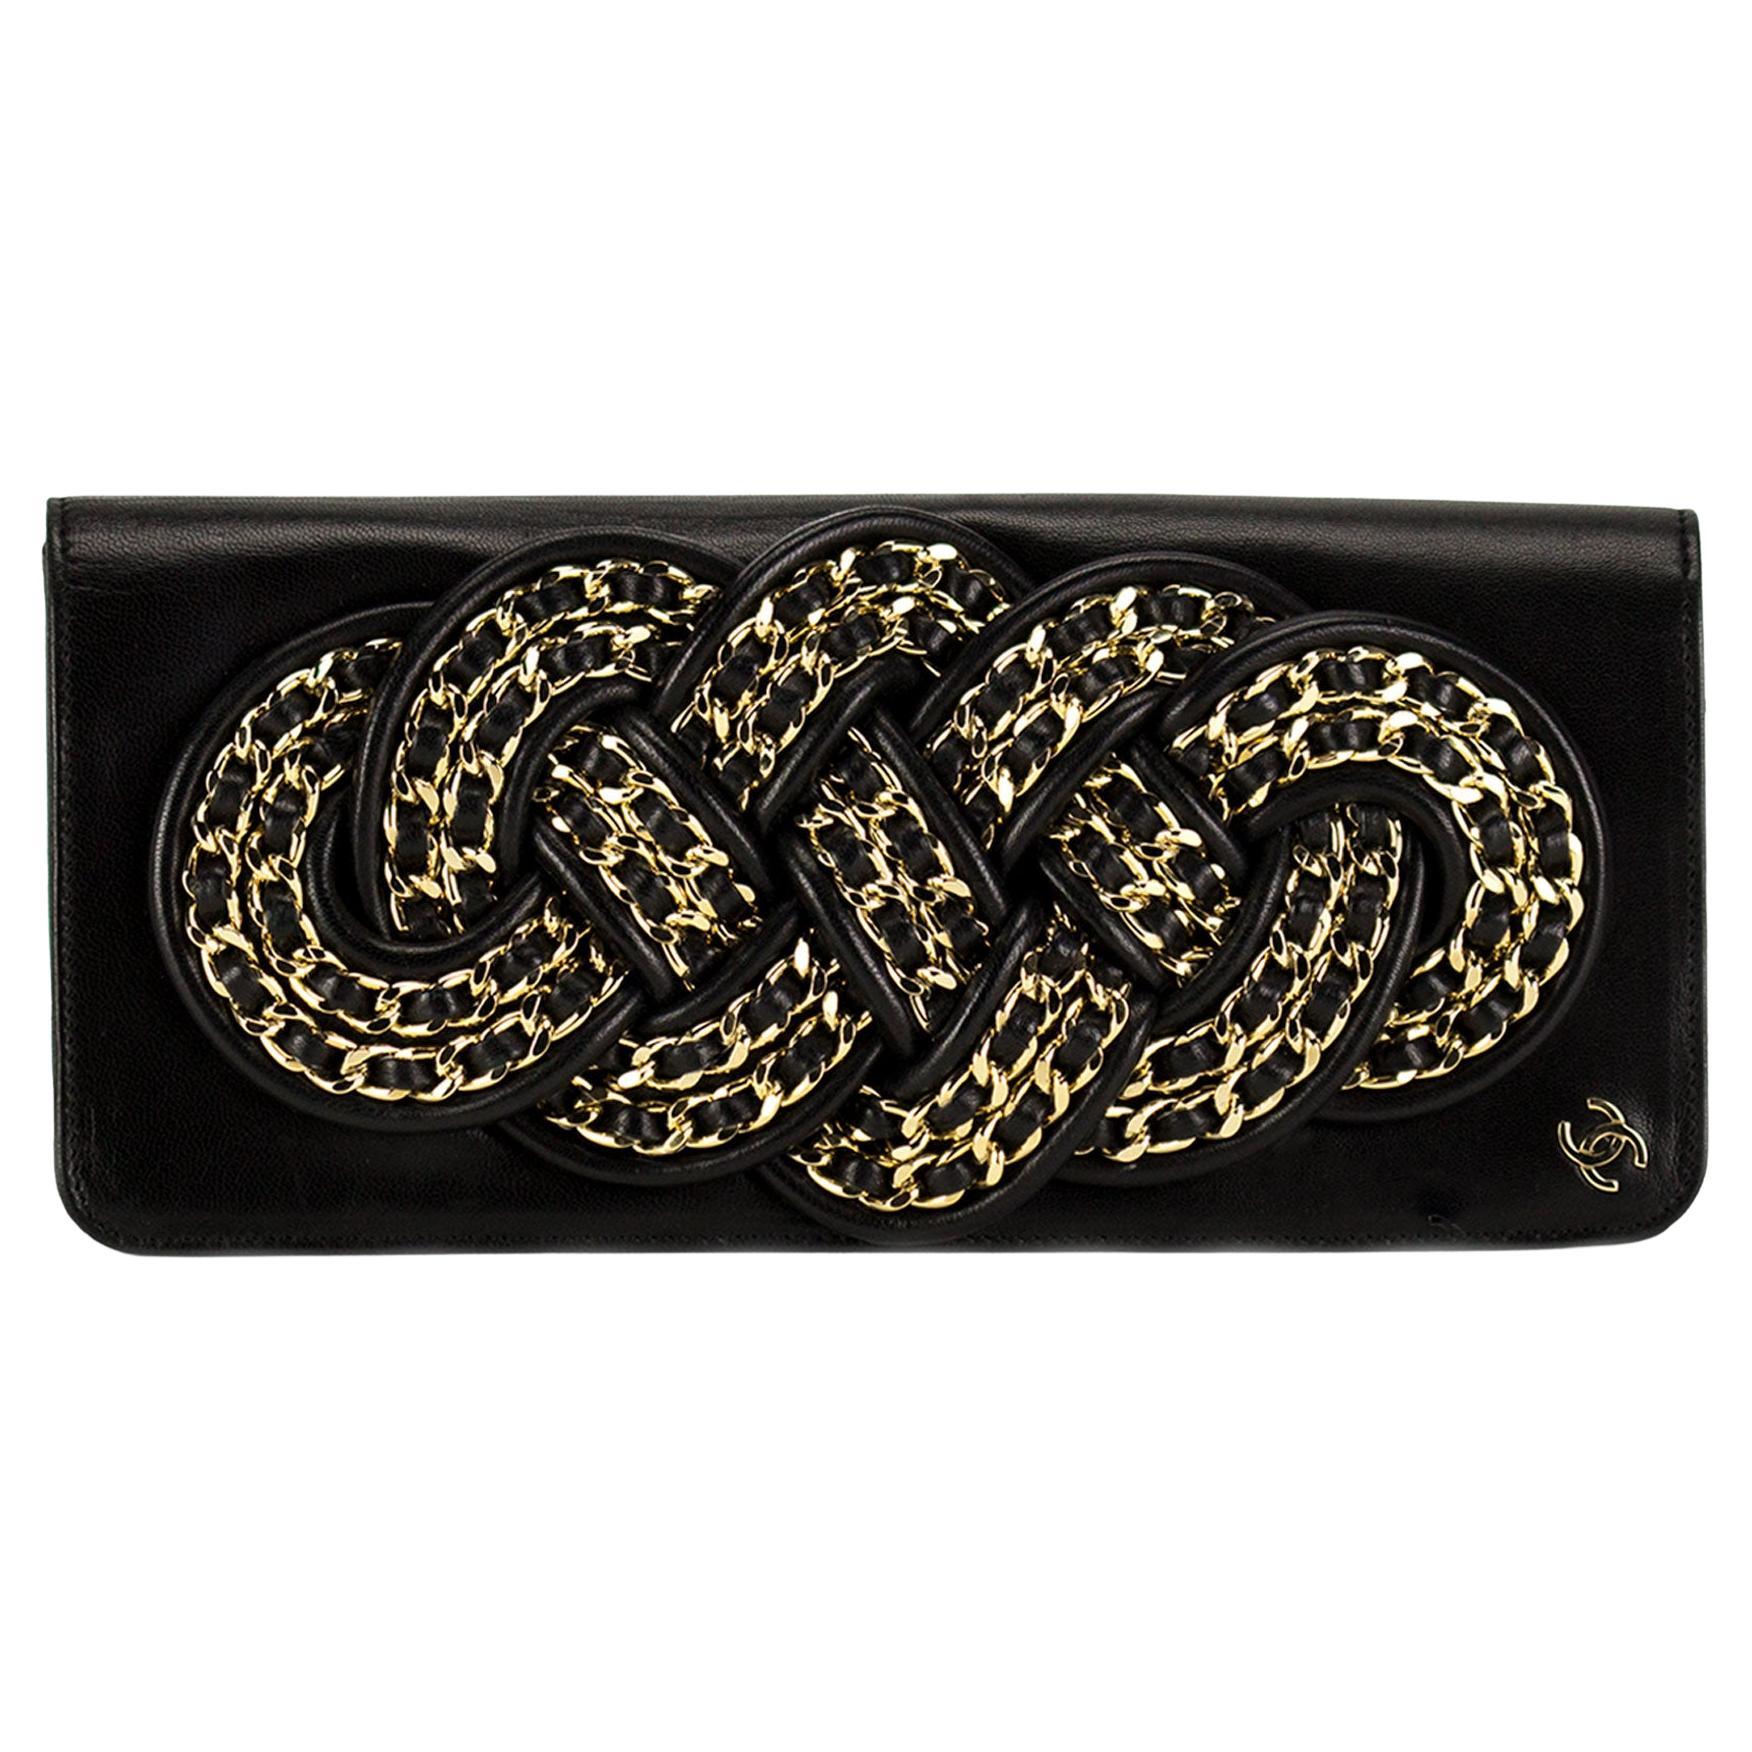 Chanel 2008 Gold Twisted Iconic Chain Braided Knotted Rare Black Lambskin Clutch